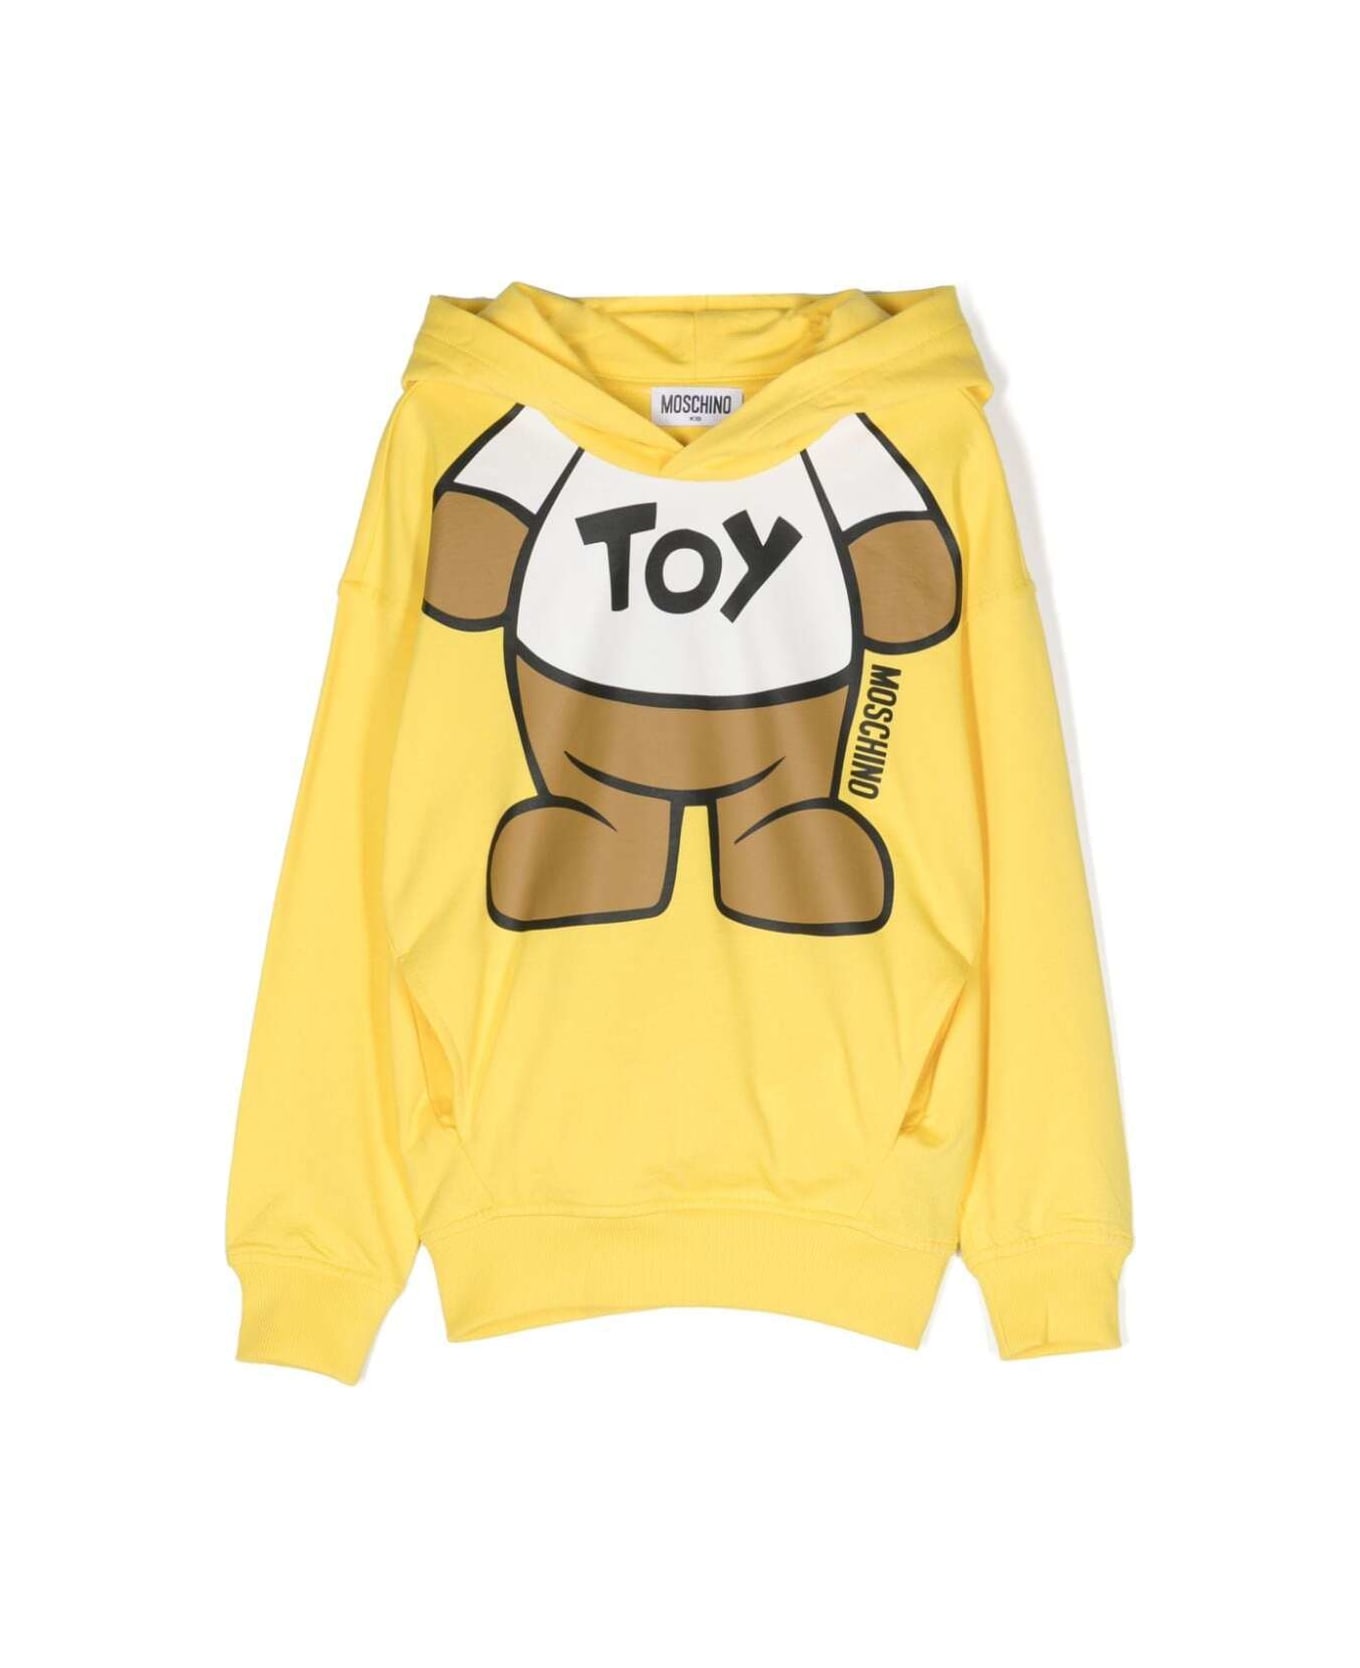 Moschino Yellow Hoodie With Teddy Bear Print In Cotton Boy - Yellow